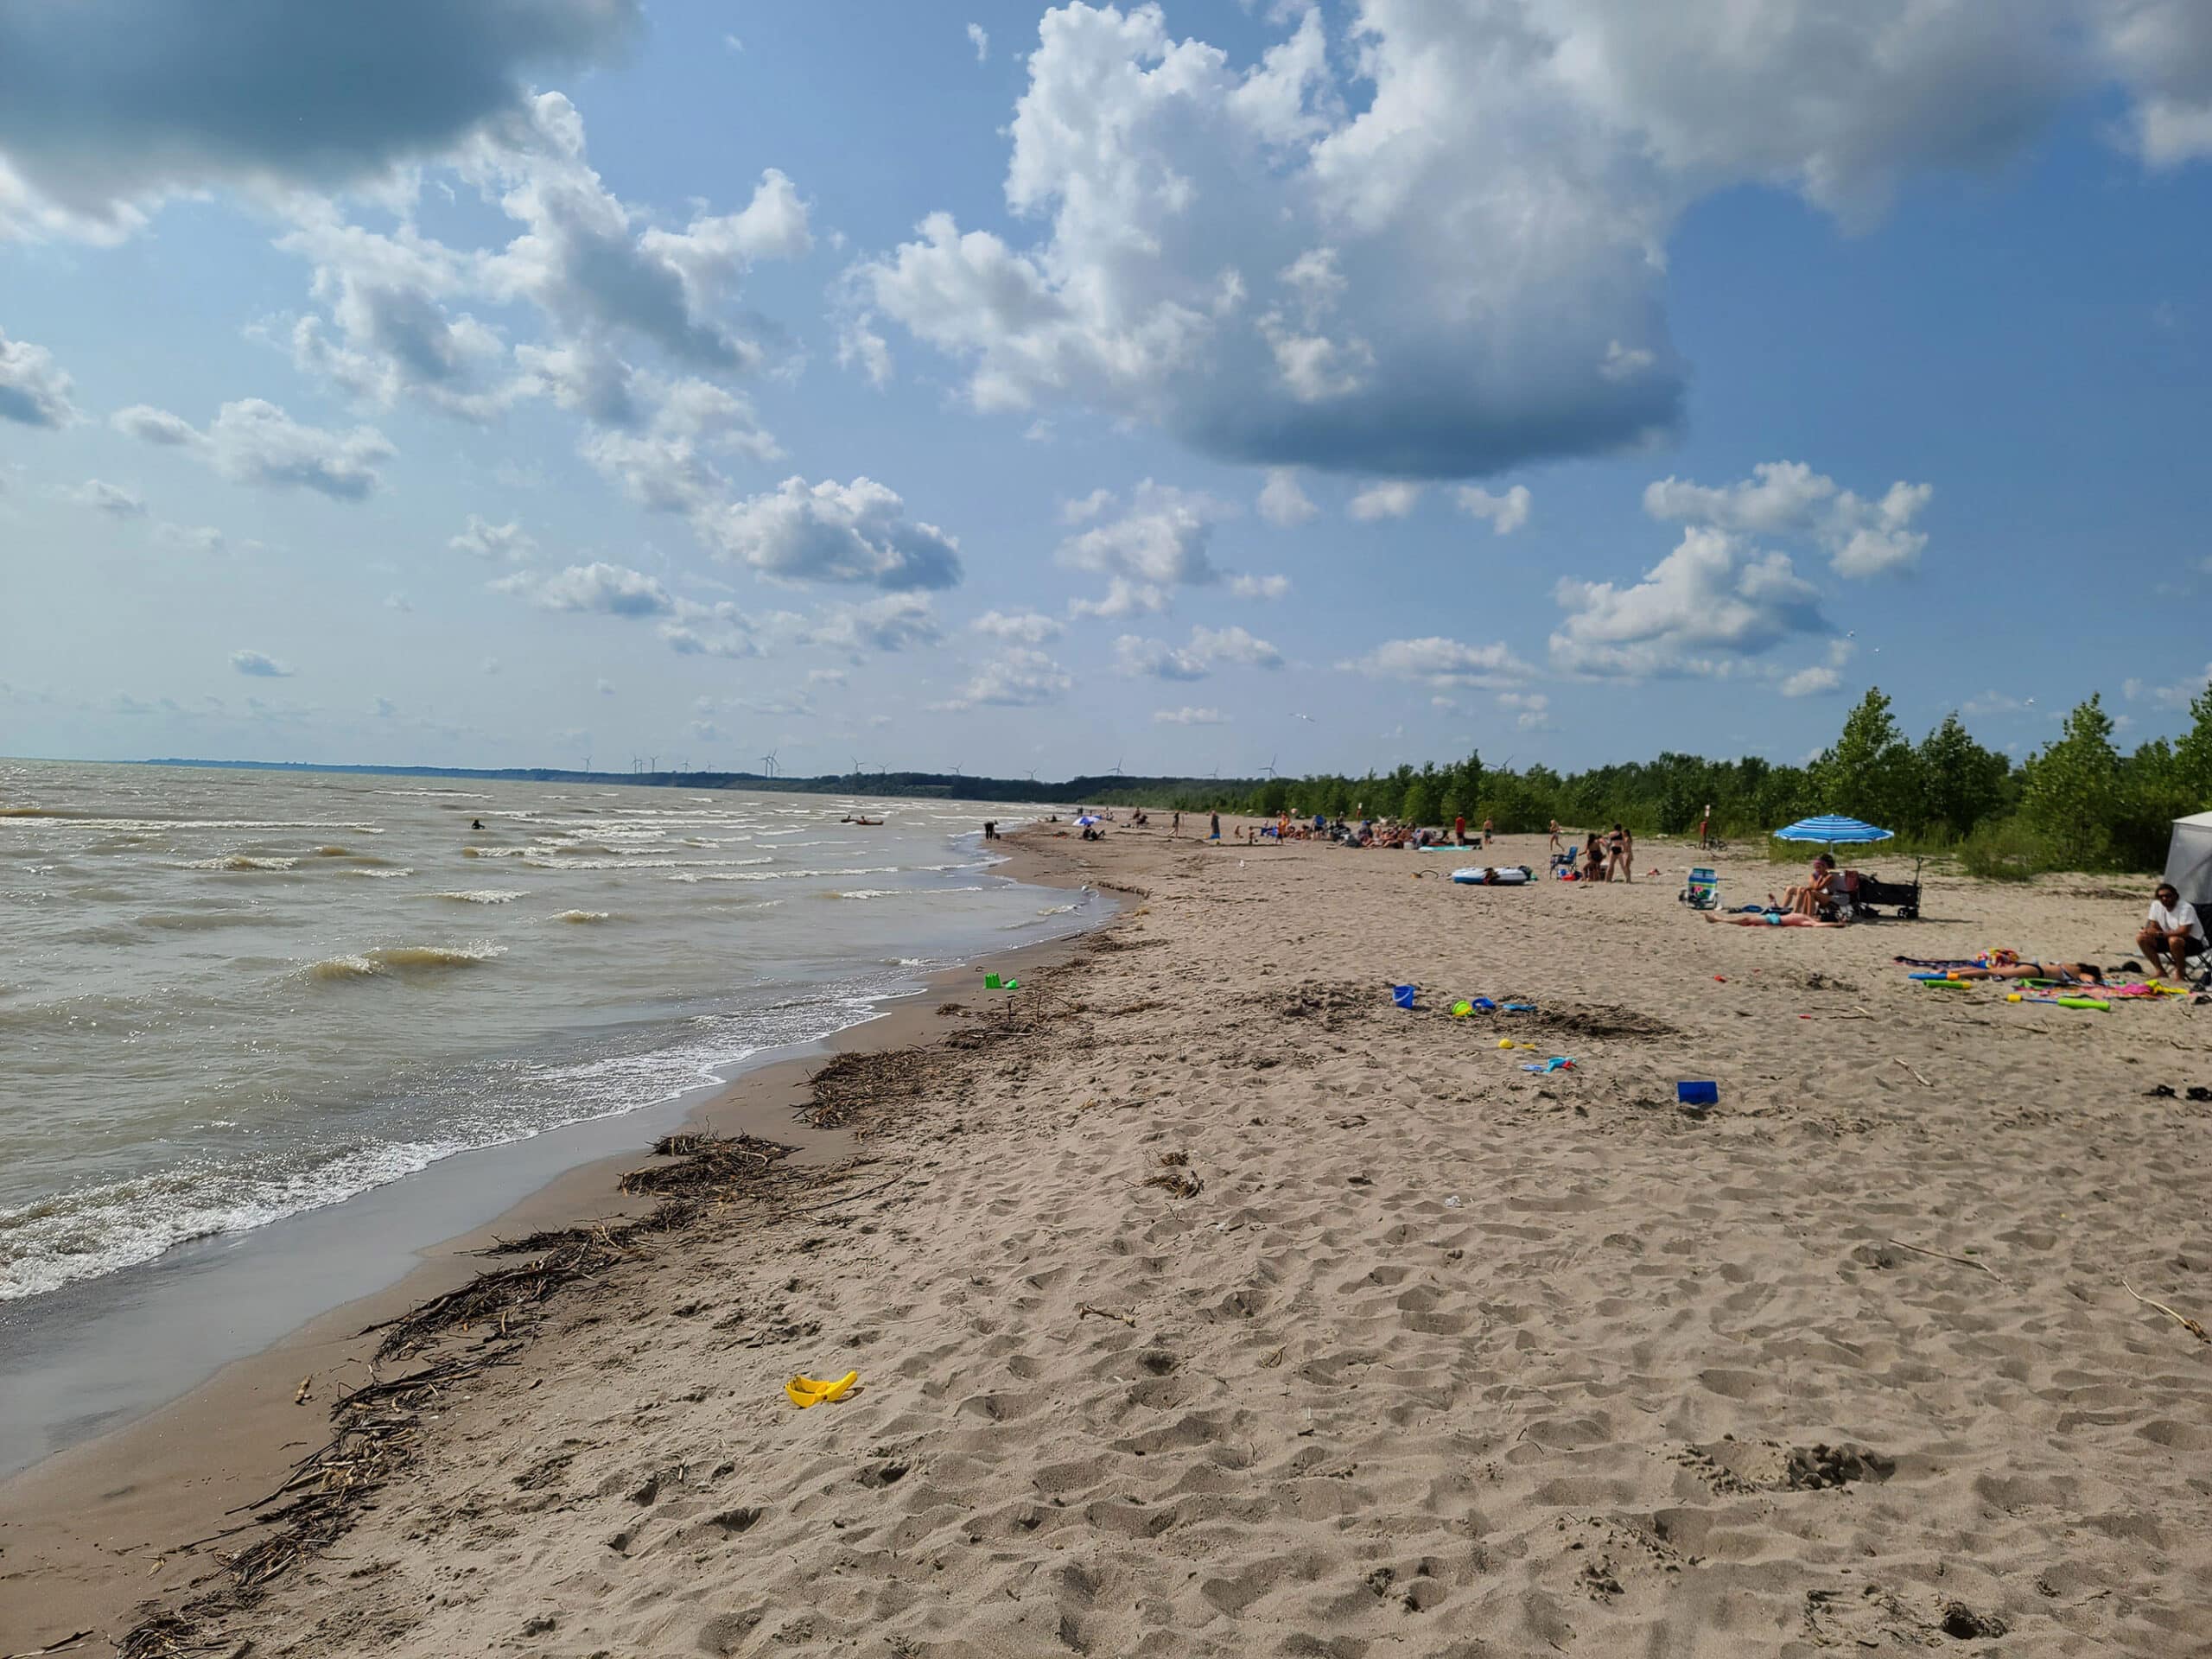 The beach at port burwell provincial park.